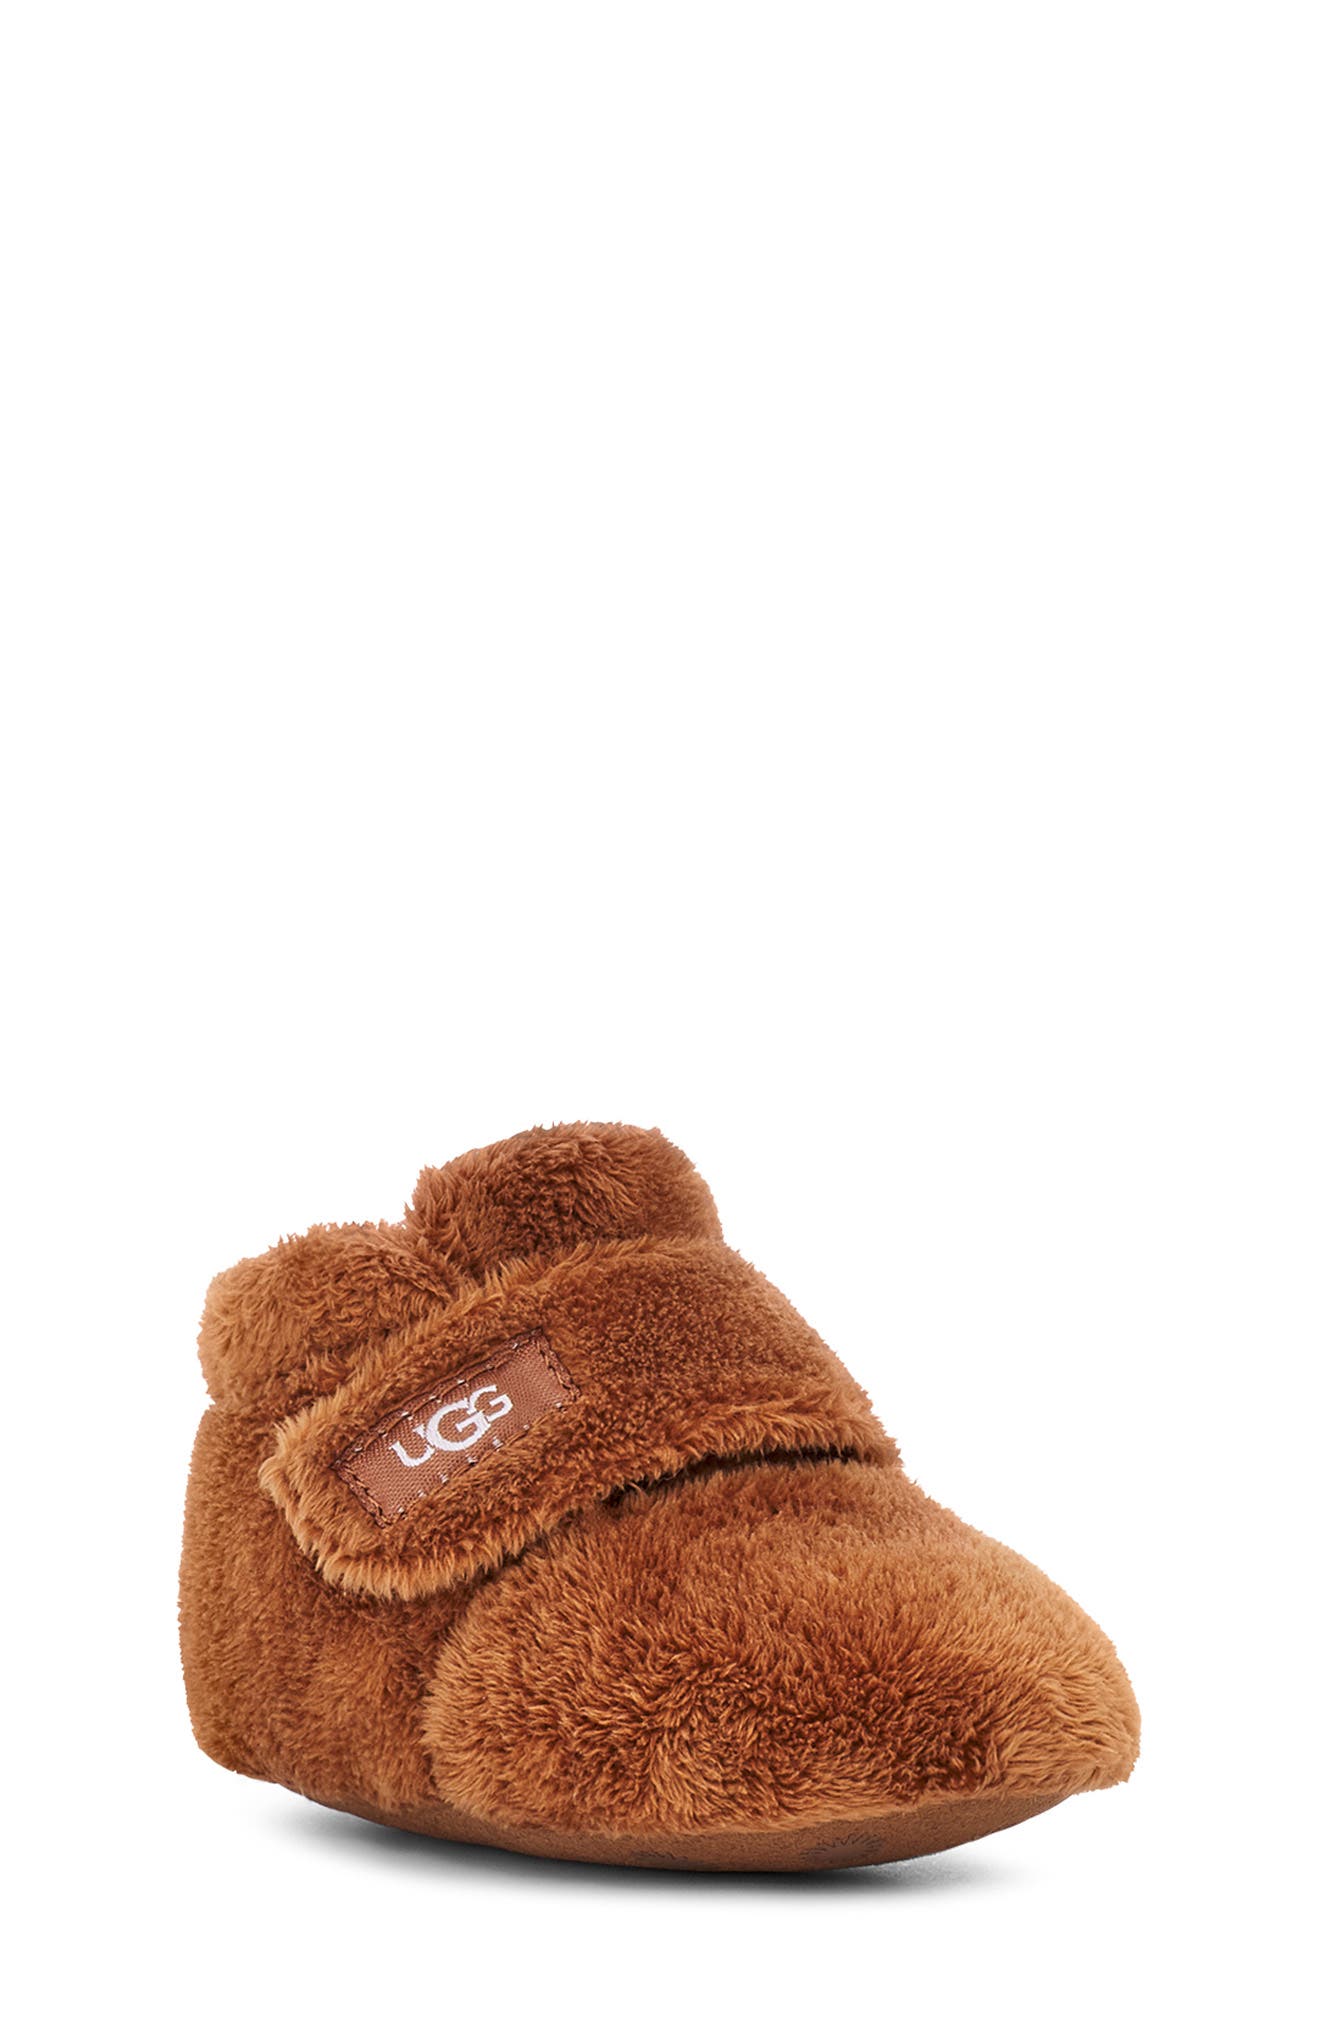 uggs for girls size 3